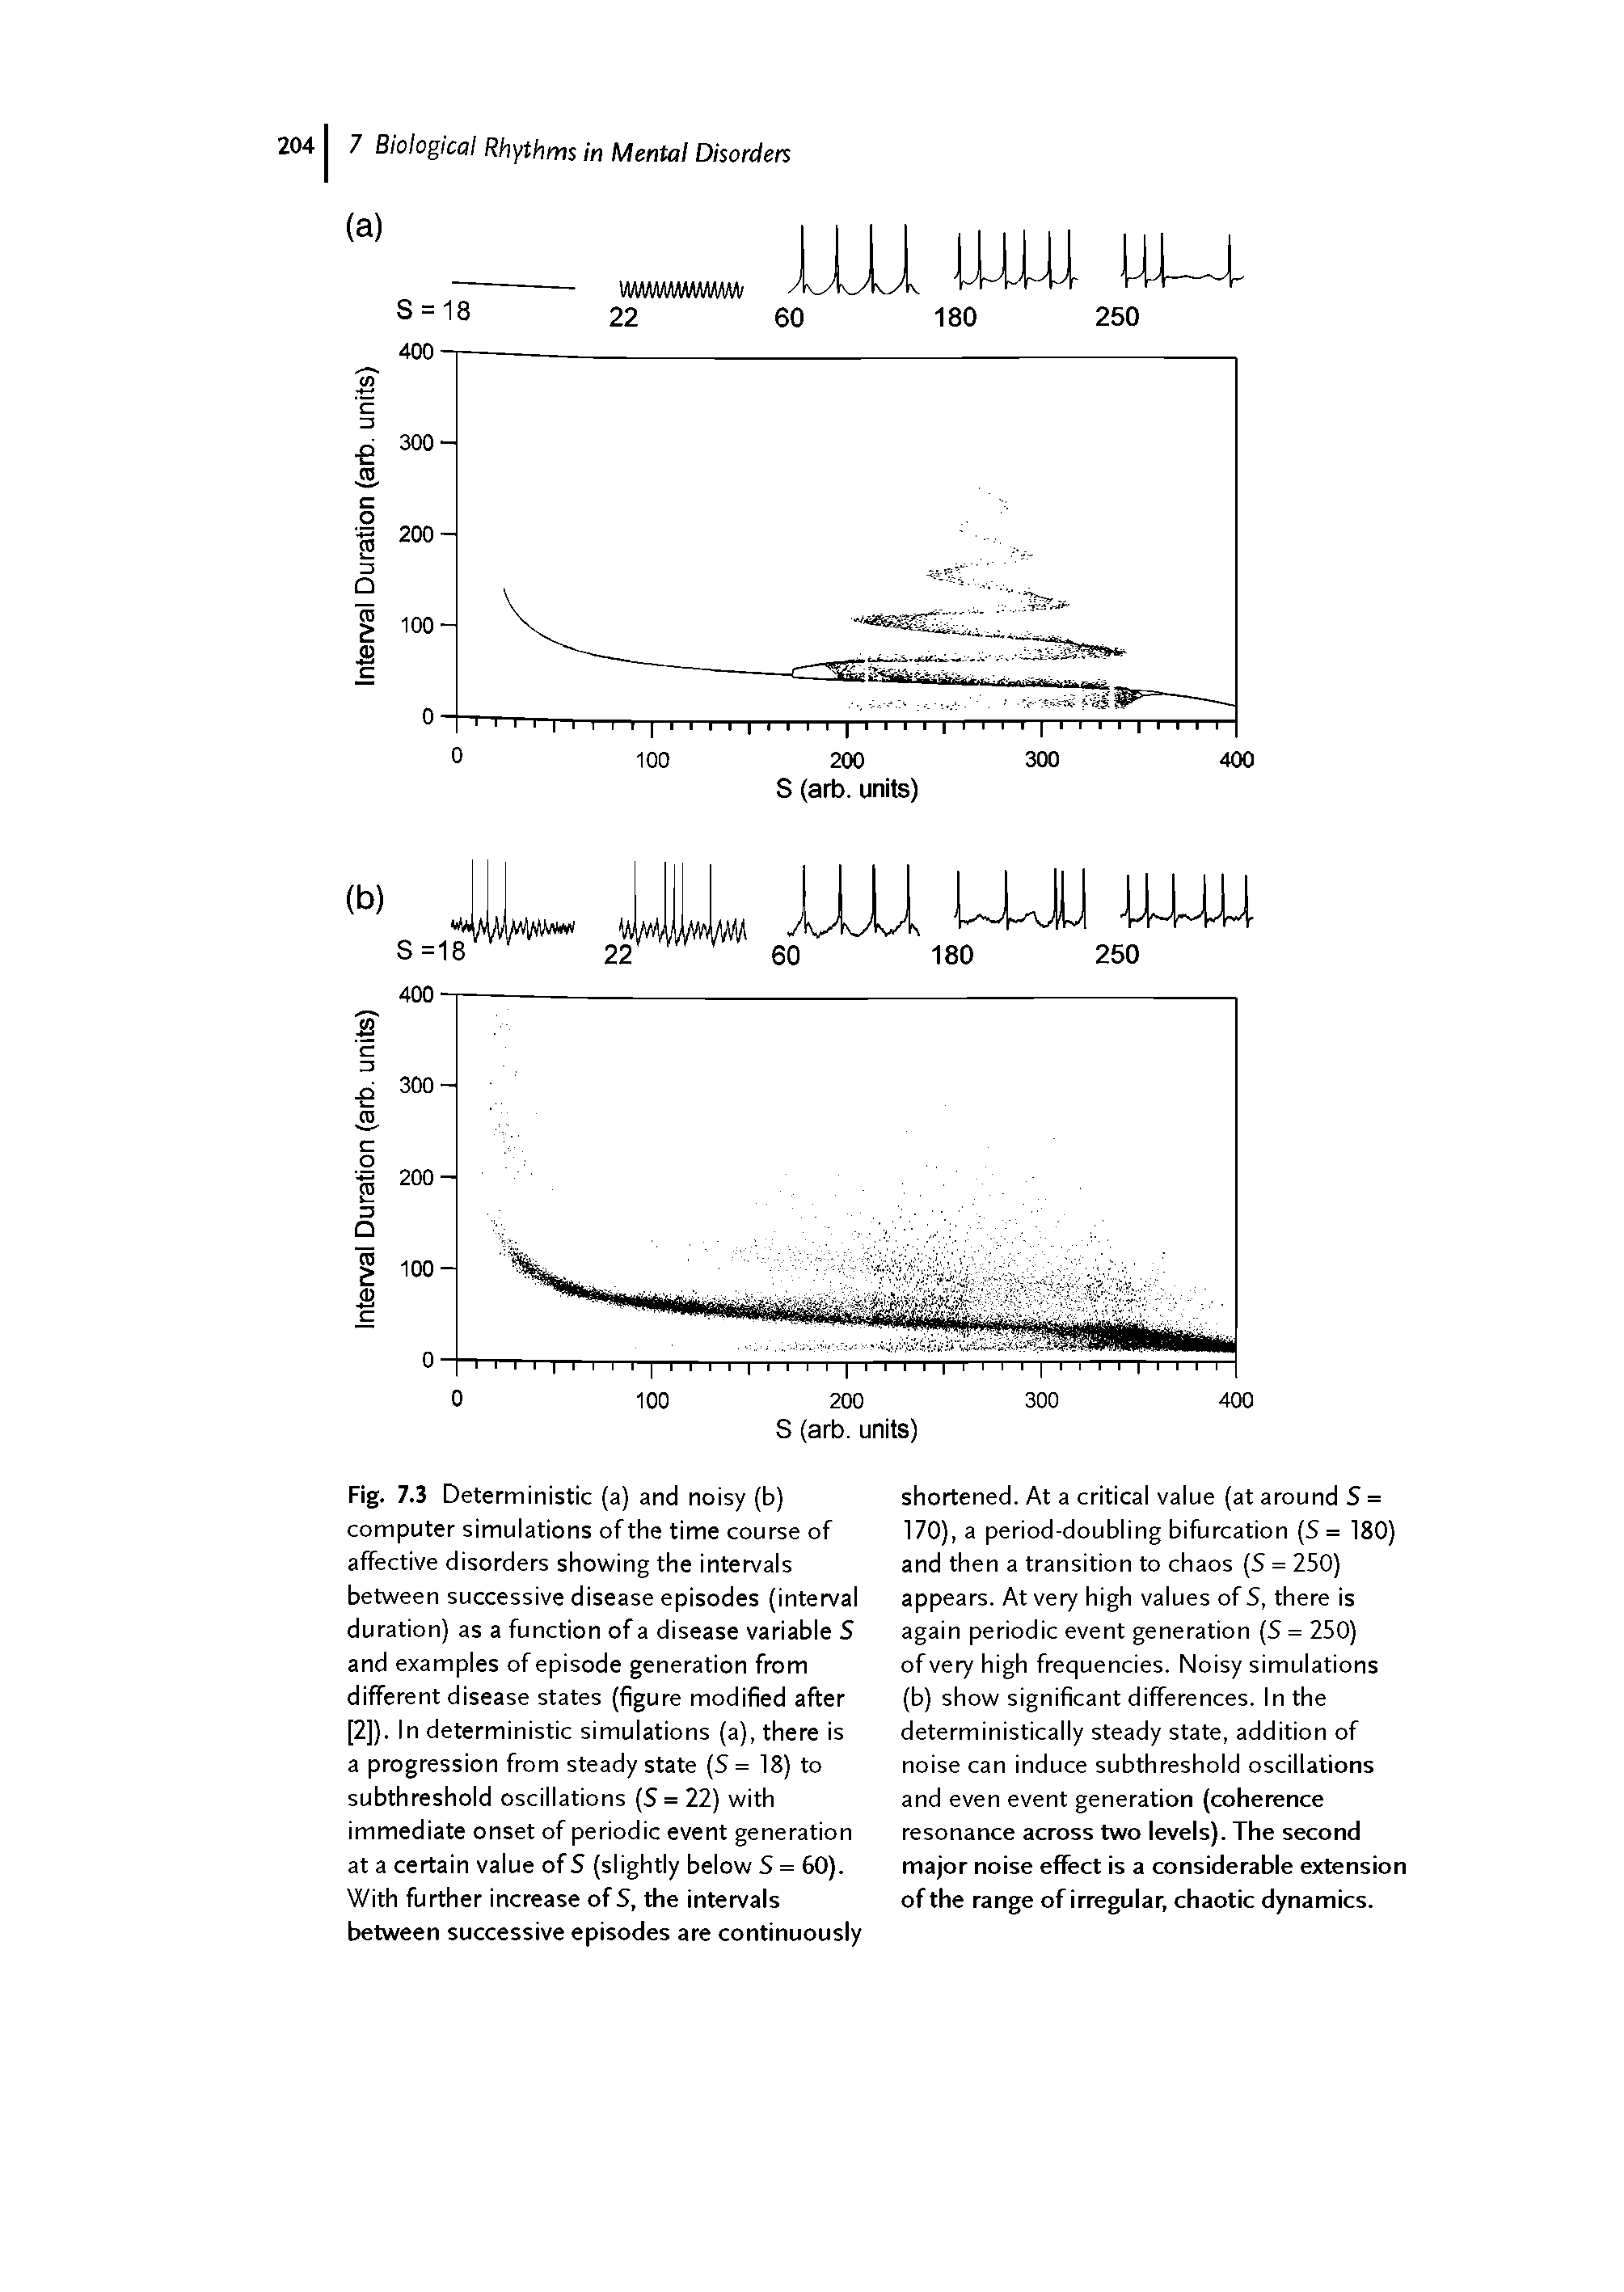 Fig. 7.3 Deterministic (a) and noisy (b) computer simulations of the time course of affective disorders showing the intervals between successive disease episodes (interval duration) as a function of a disease variable S and examples of episode generation from different disease states (figure modified after [2]). In deterministic simulations (a), there is a progression from steady state (S = 18) to subthreshold oscillations (S = 22) with immediate onset of periodic event generation at a certain value of S (slightly below S = 60). With further increase of S, the intervals between successive episodes are continuously...